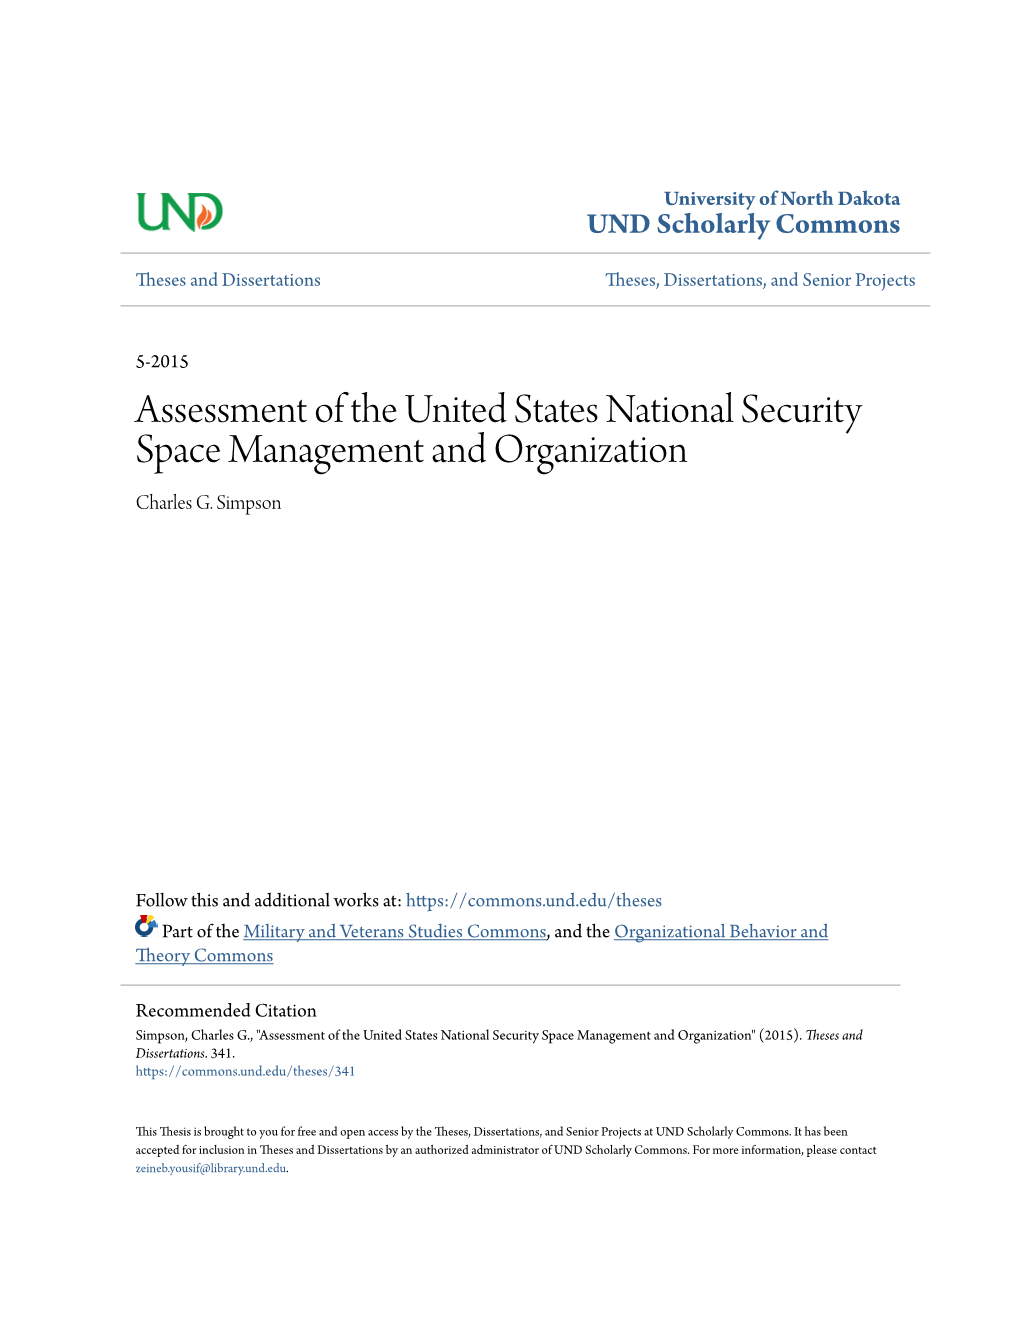 Assessment of the United States National Security Space Management and Organization Charles G